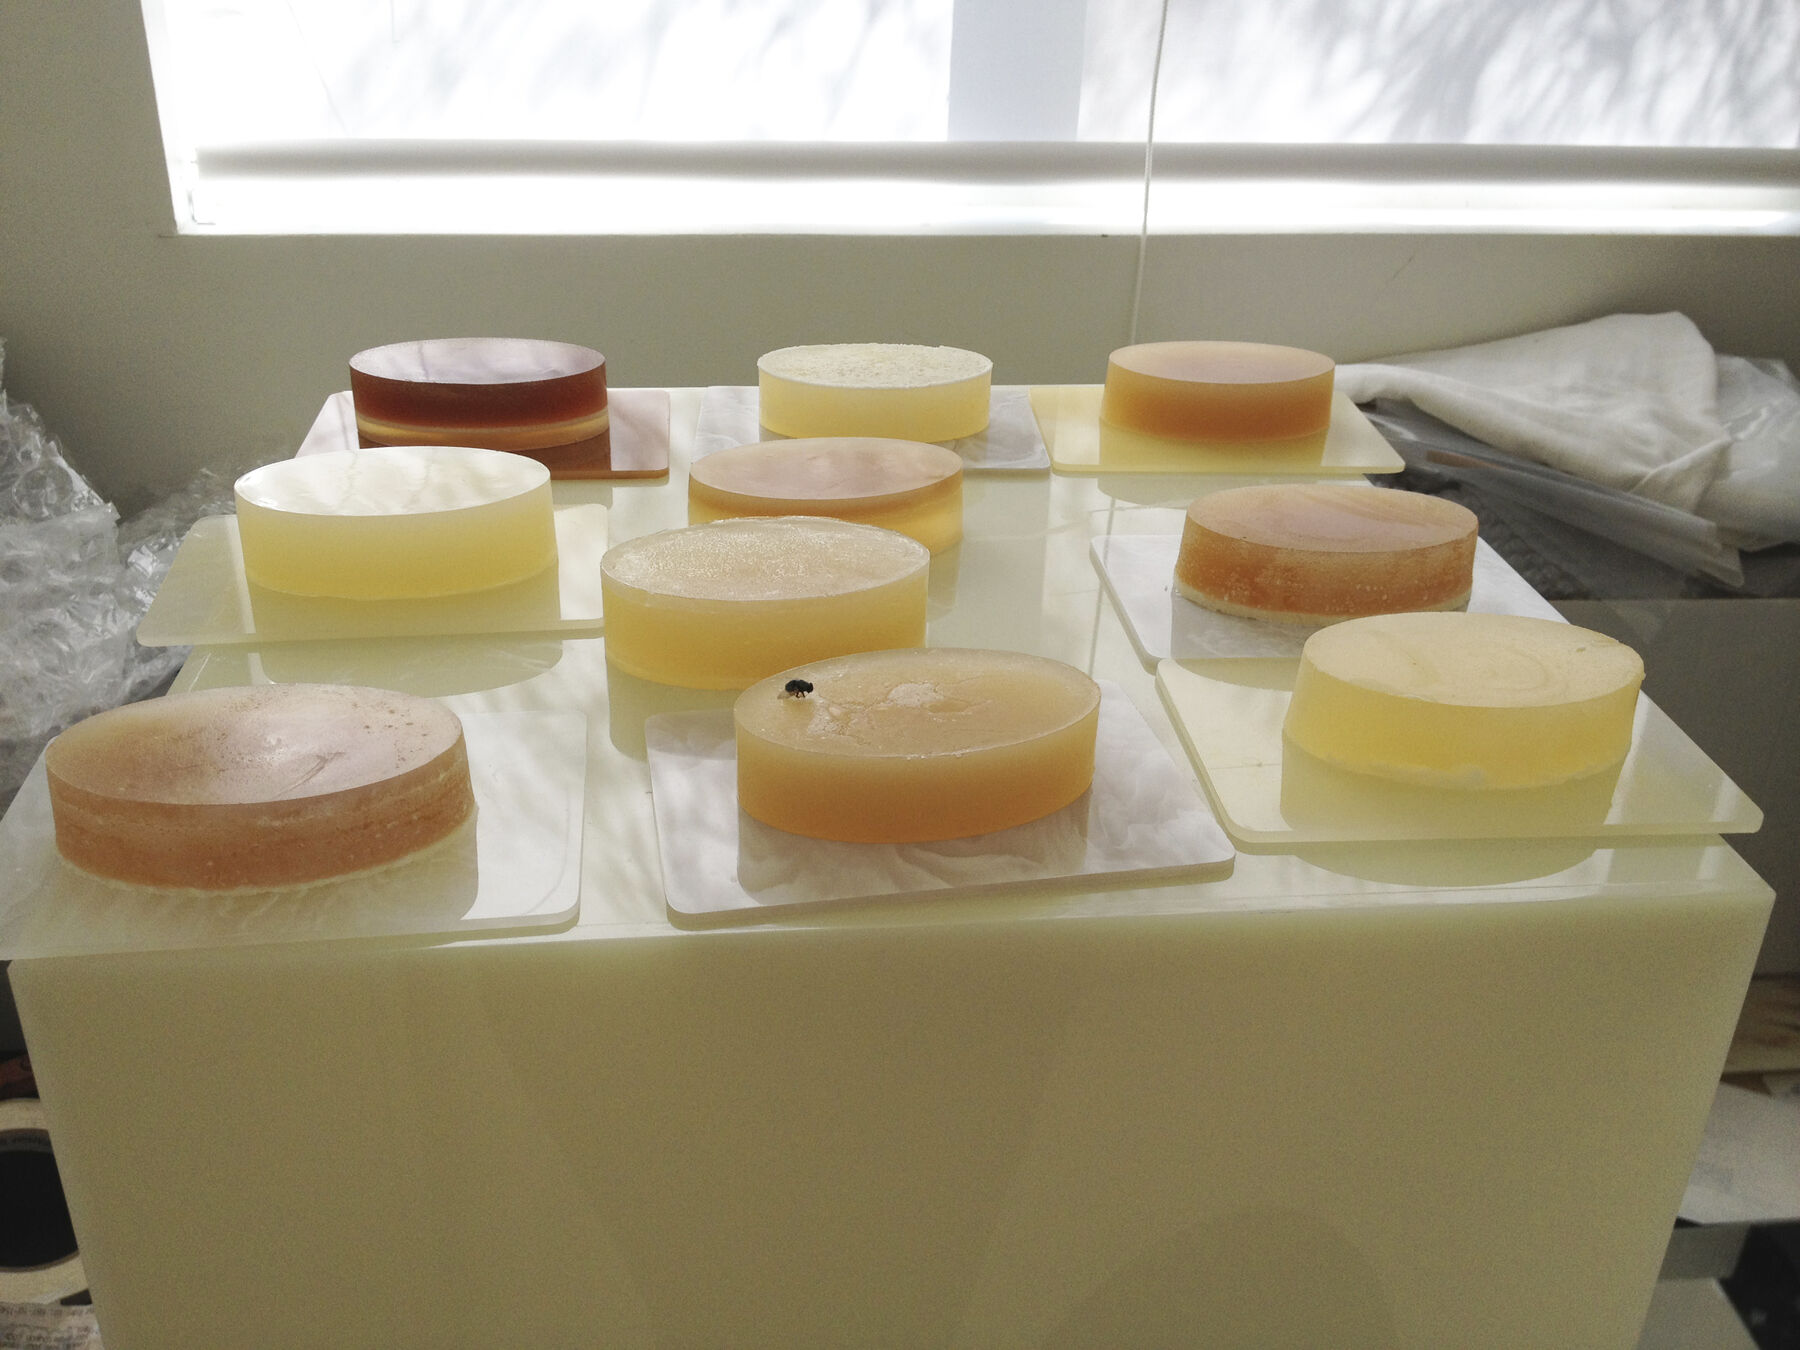 Sunlit rows of peach-, brown-, and cream-colored soaps on individual platters atop plinth; a fly sits on one